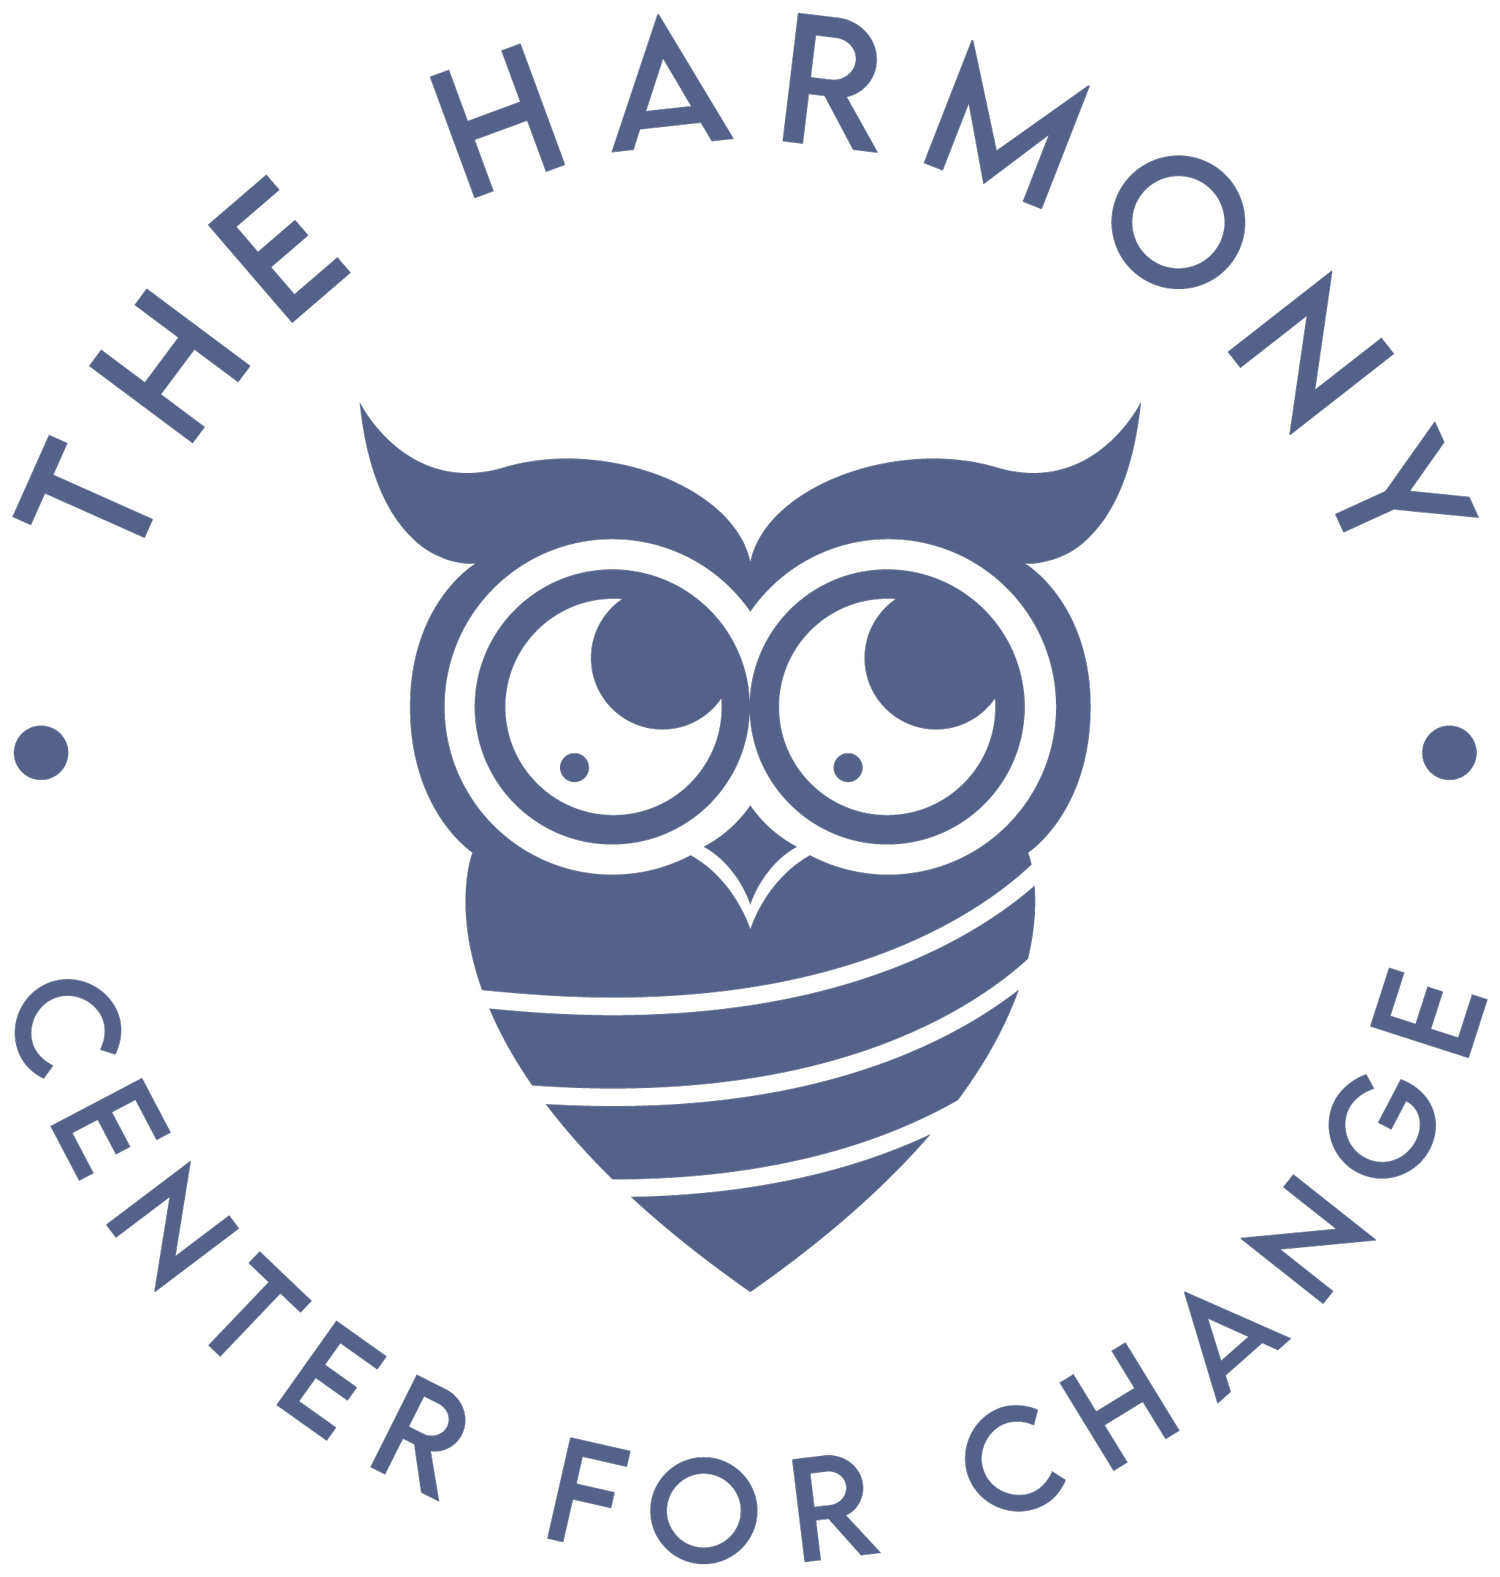 The Harmony Center for Change